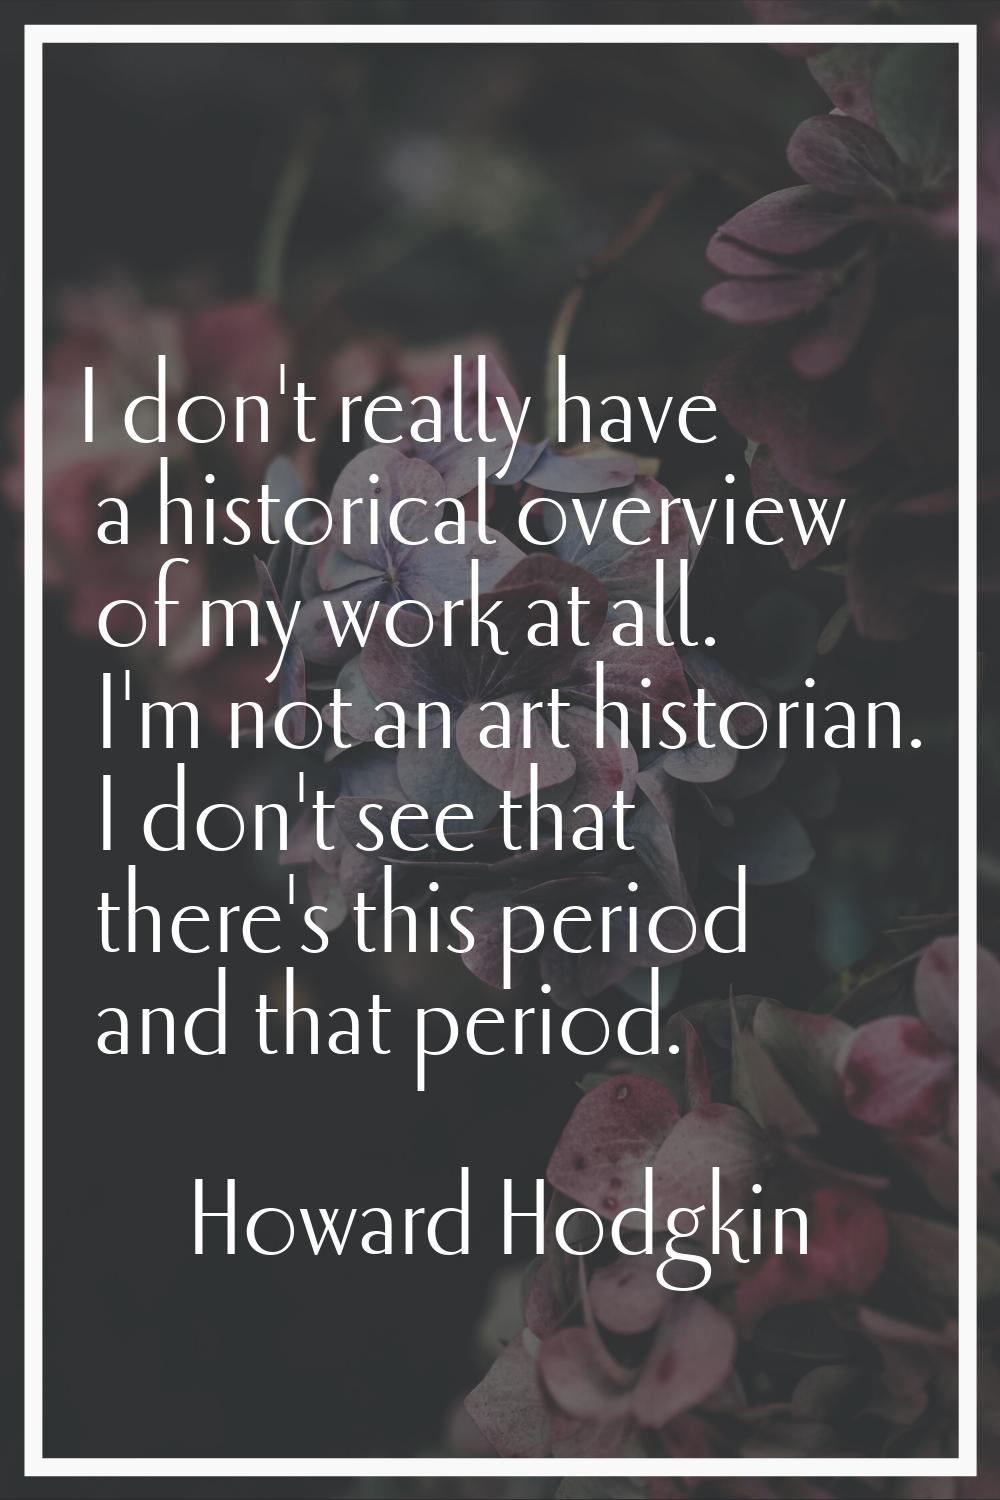 I don't really have a historical overview of my work at all. I'm not an art historian. I don't see 